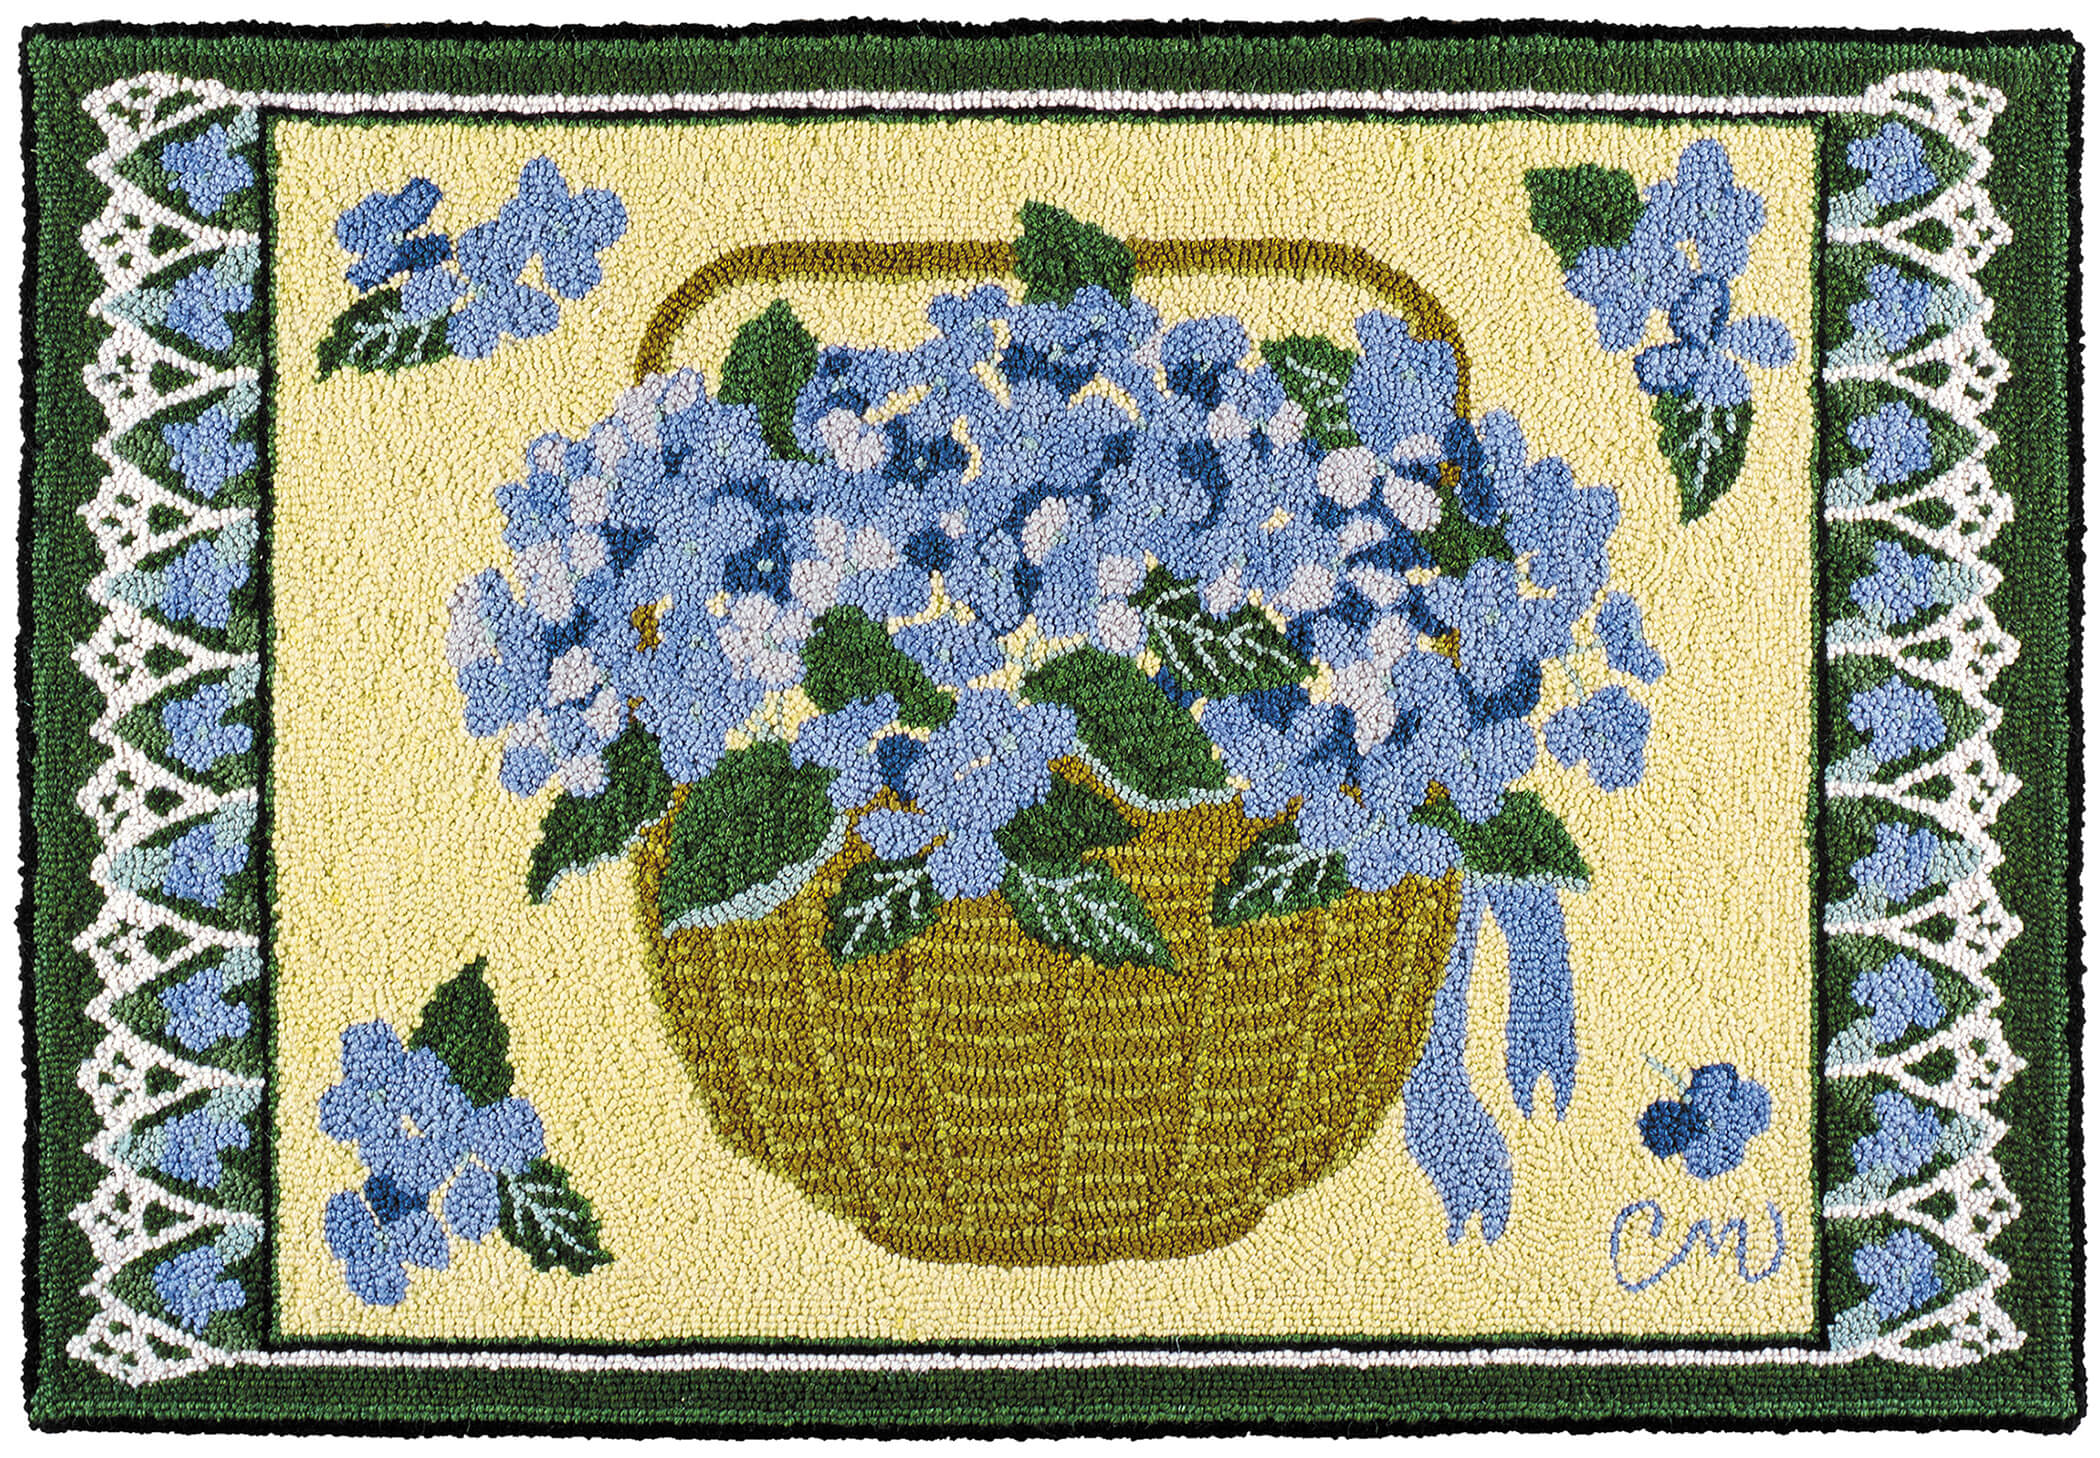 hooked rugs claire murray hydrangea basker 2 x 3 hand hooked rug DGZWUFE